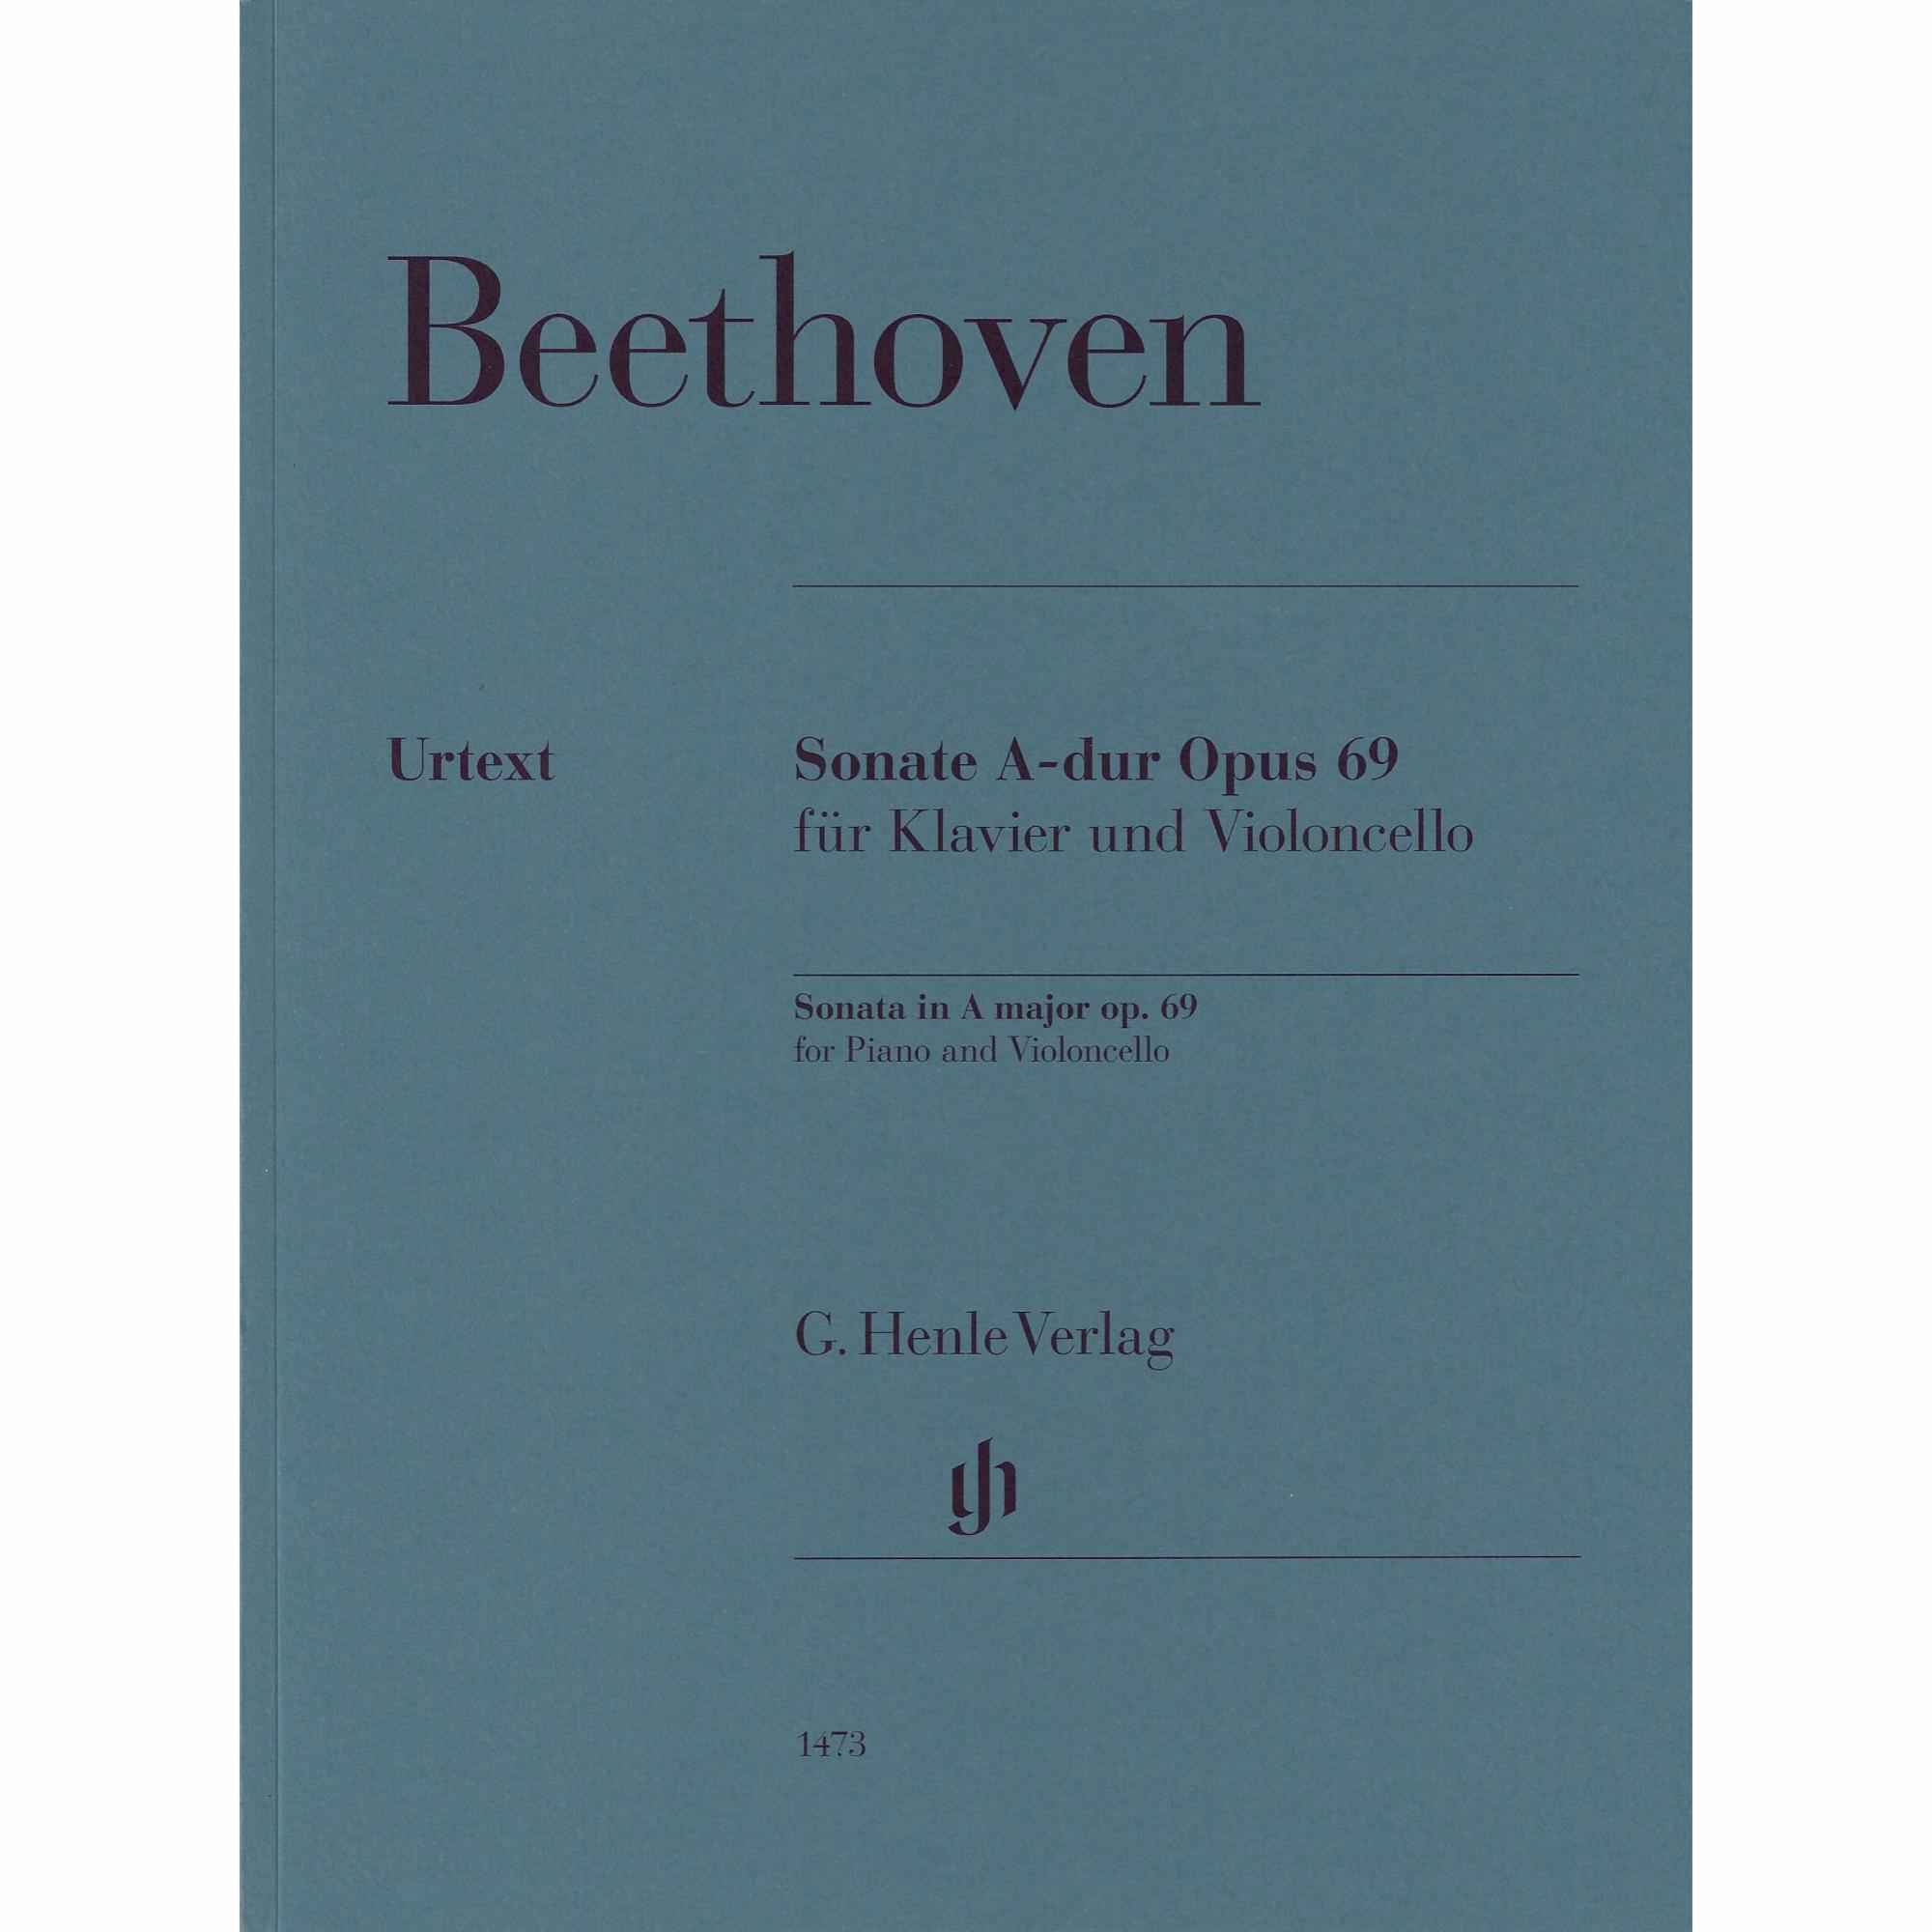 Beethoven -- Sonata in A Major, Op. 69 for Cello and Piano